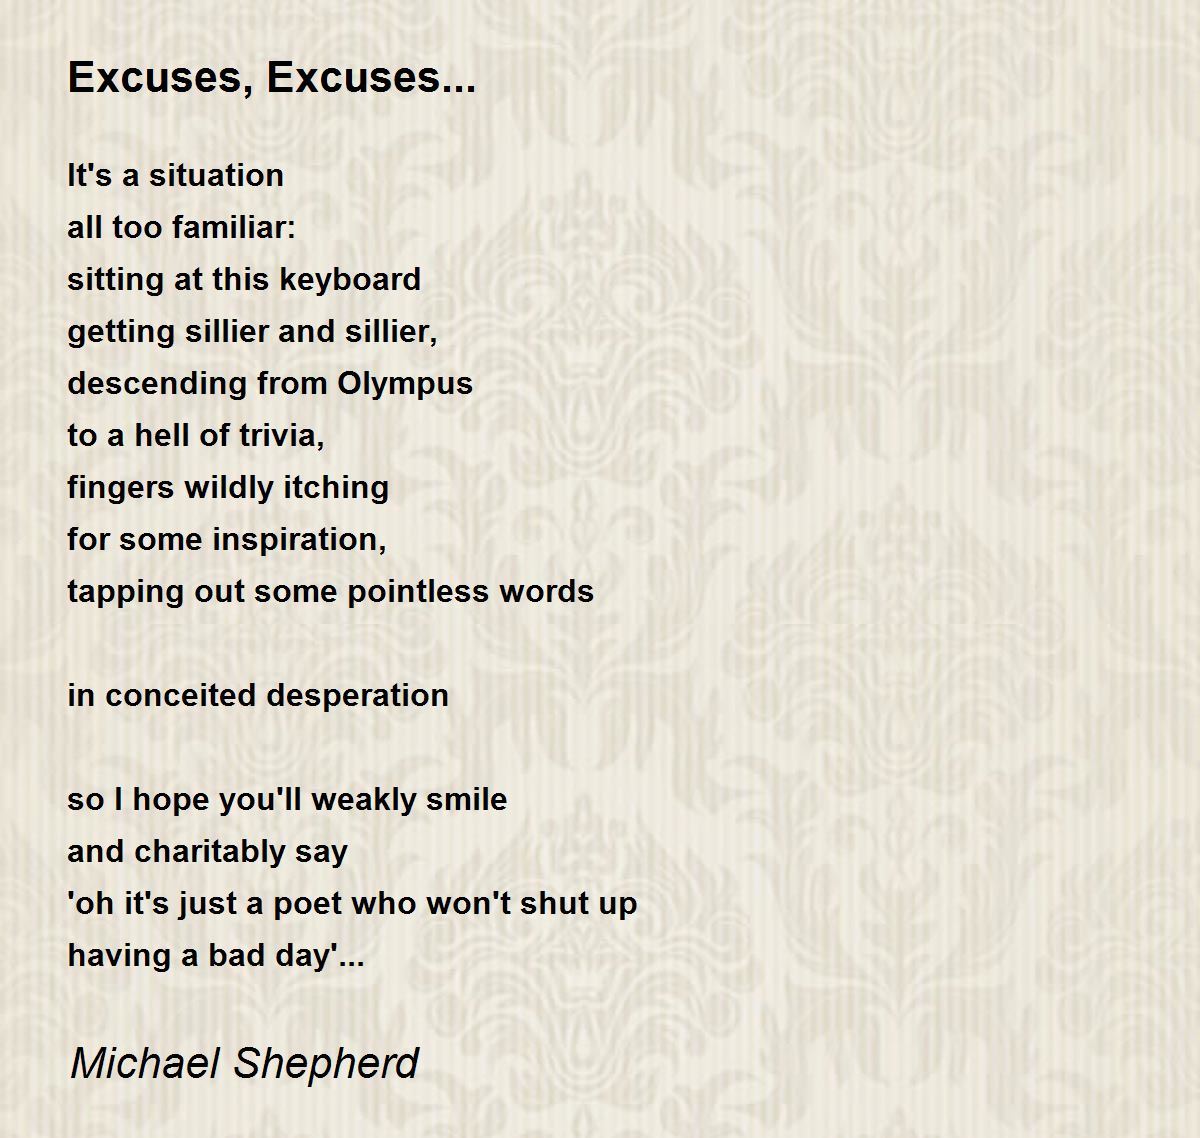 Excuses poem by langston hughes   clintons blog